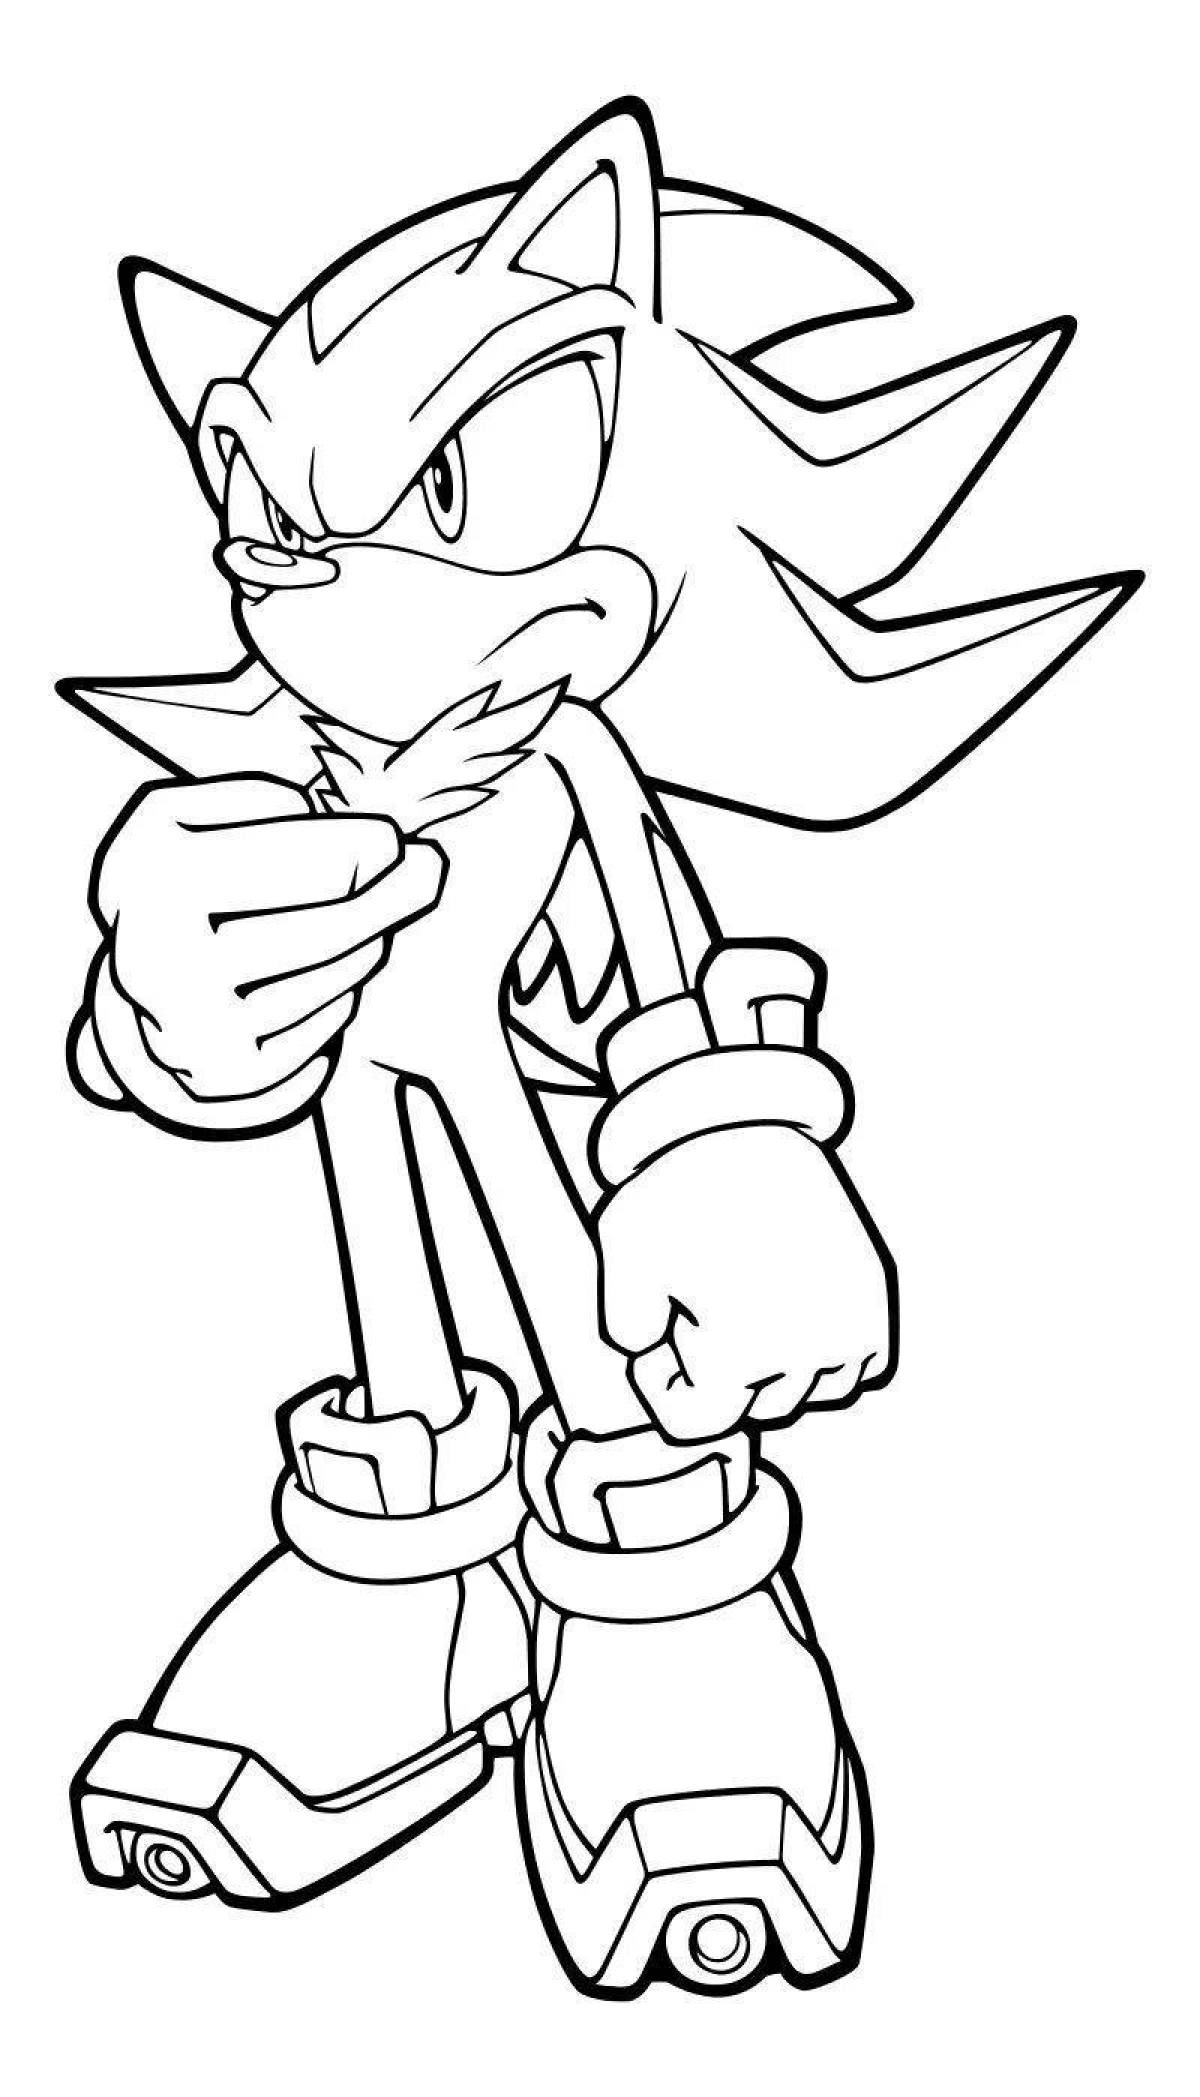 Sonic heroes funny coloring book